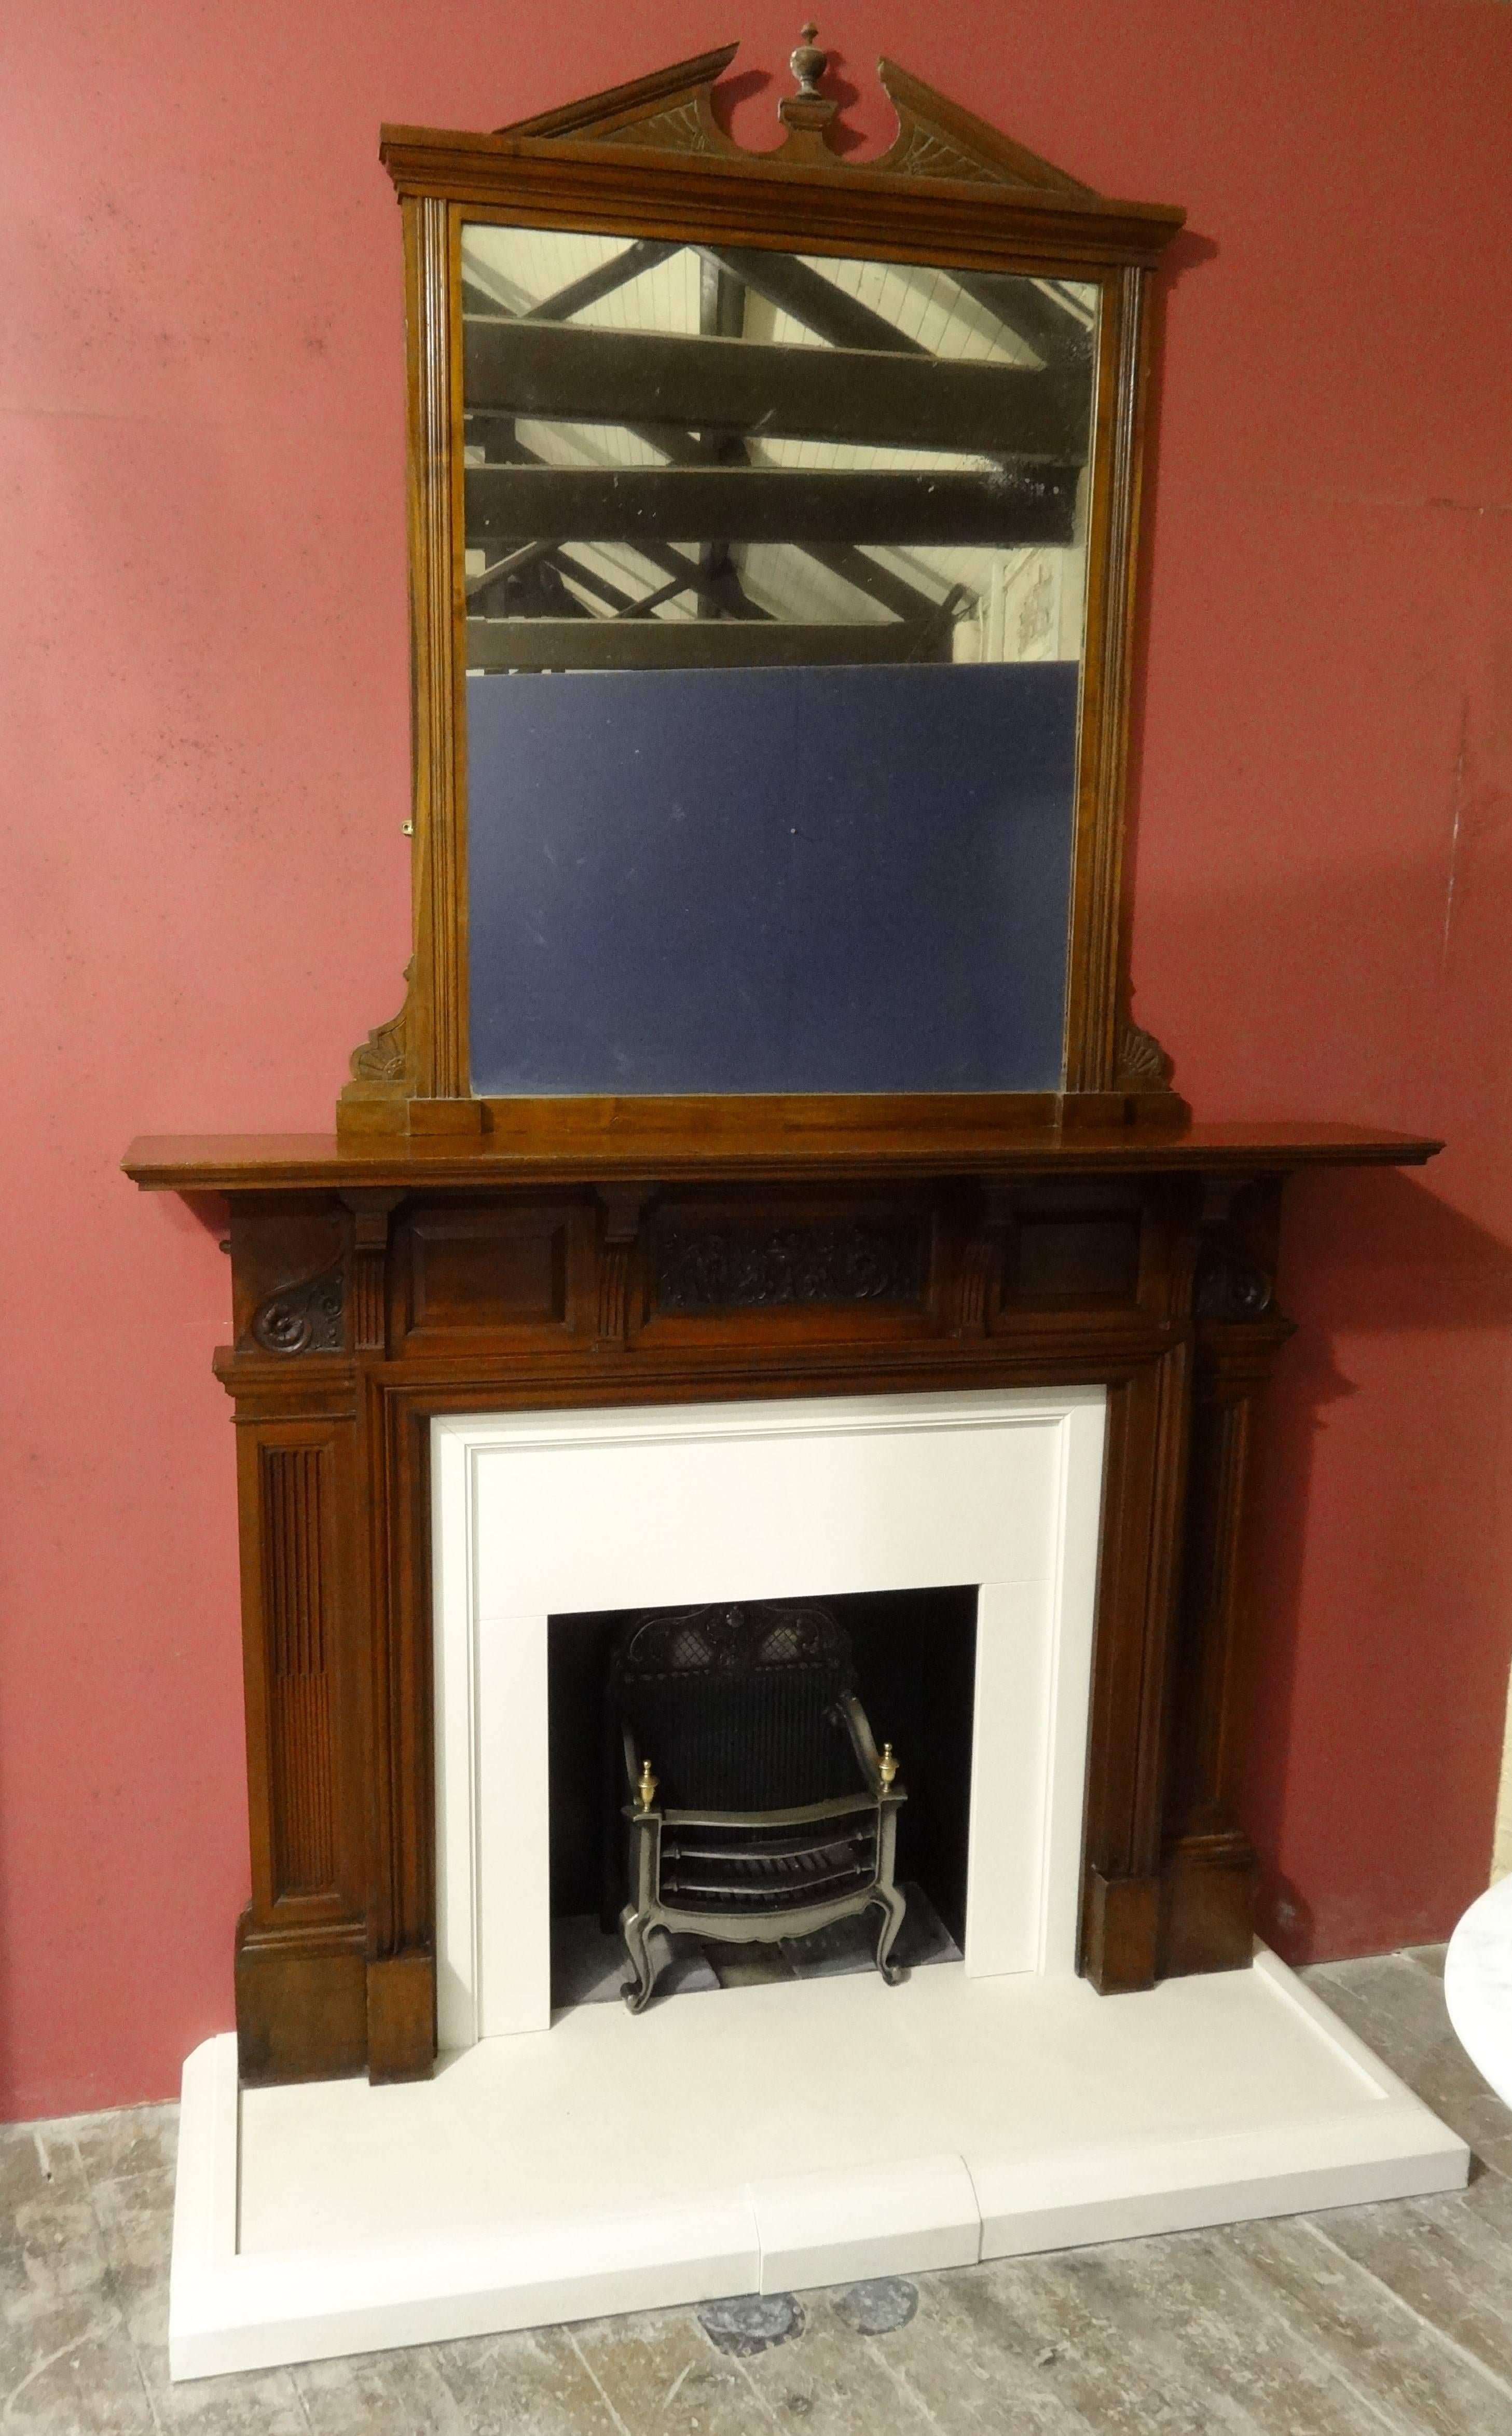 Northern Irish 20th Century Edwardian Carved Walnut Fireplace Surround with Overmantel Mirror For Sale